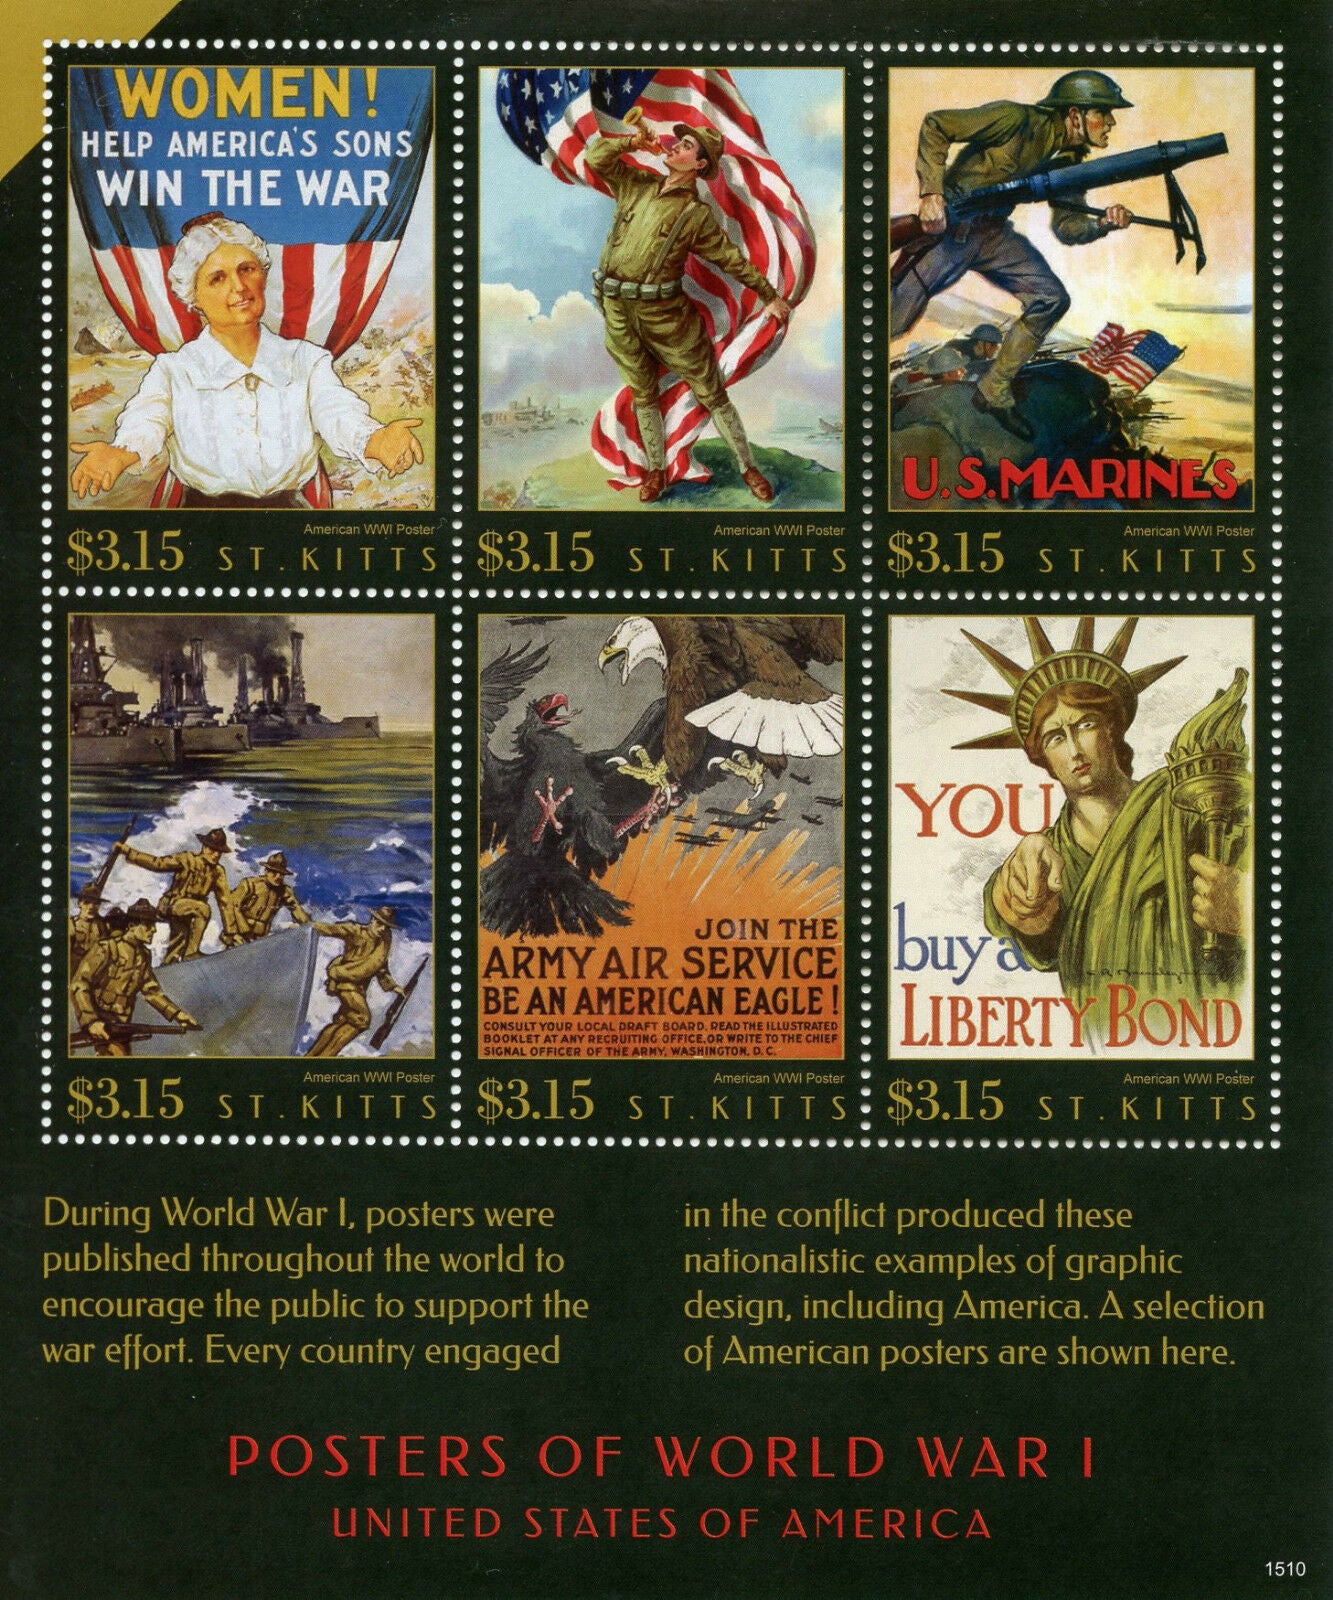 St Kitts 2015 MNH WWI WW1 Posters of World War I United States USA 6v M/S Stamps